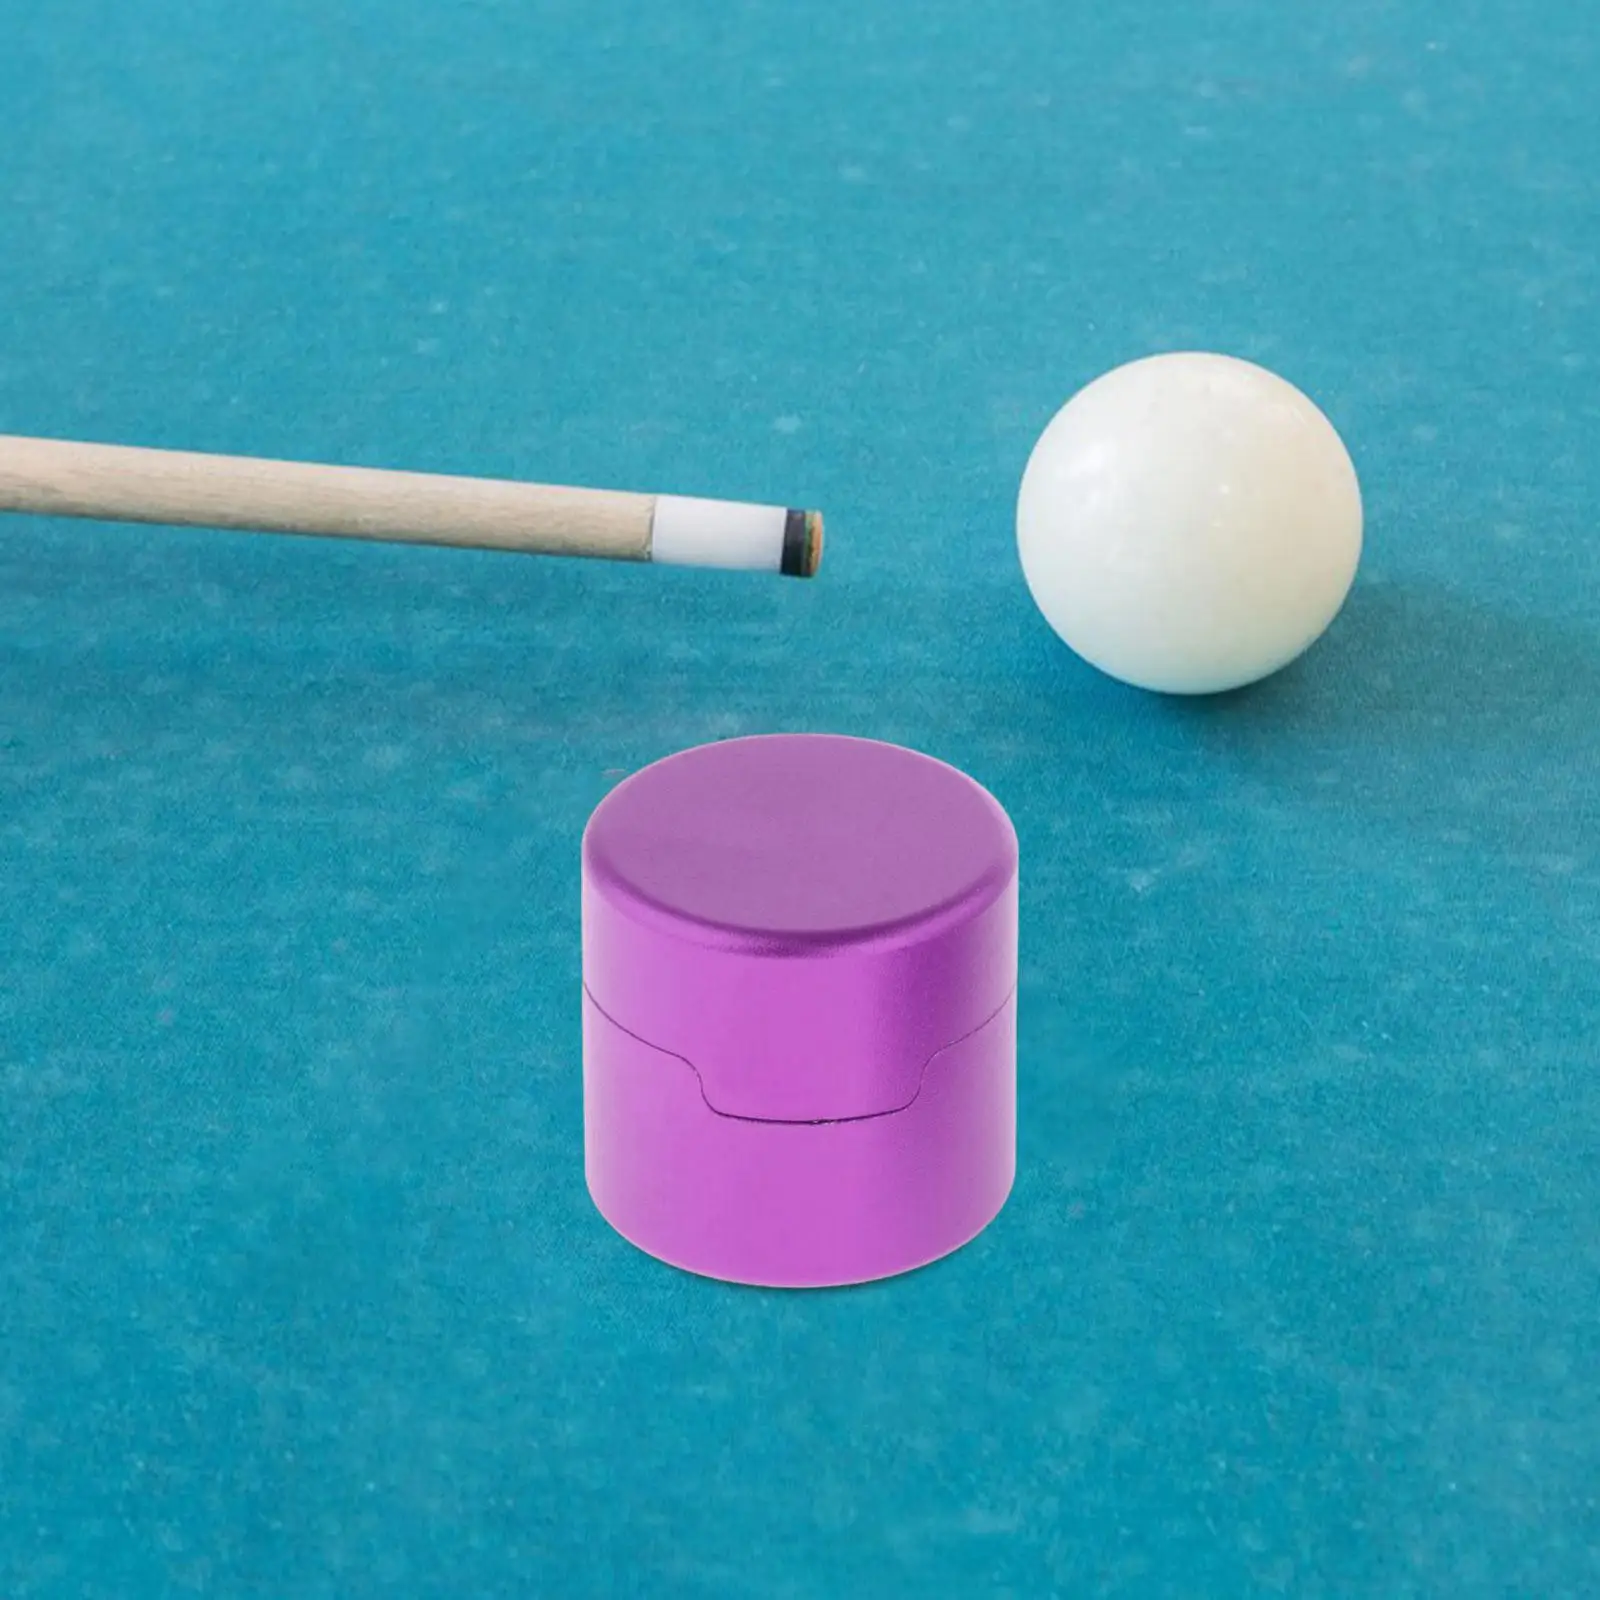 Pool Cue Chalk Holder Cup Container Easy to Use Portable Circular Organizer Practical Tool Billiards Snooker Accessories